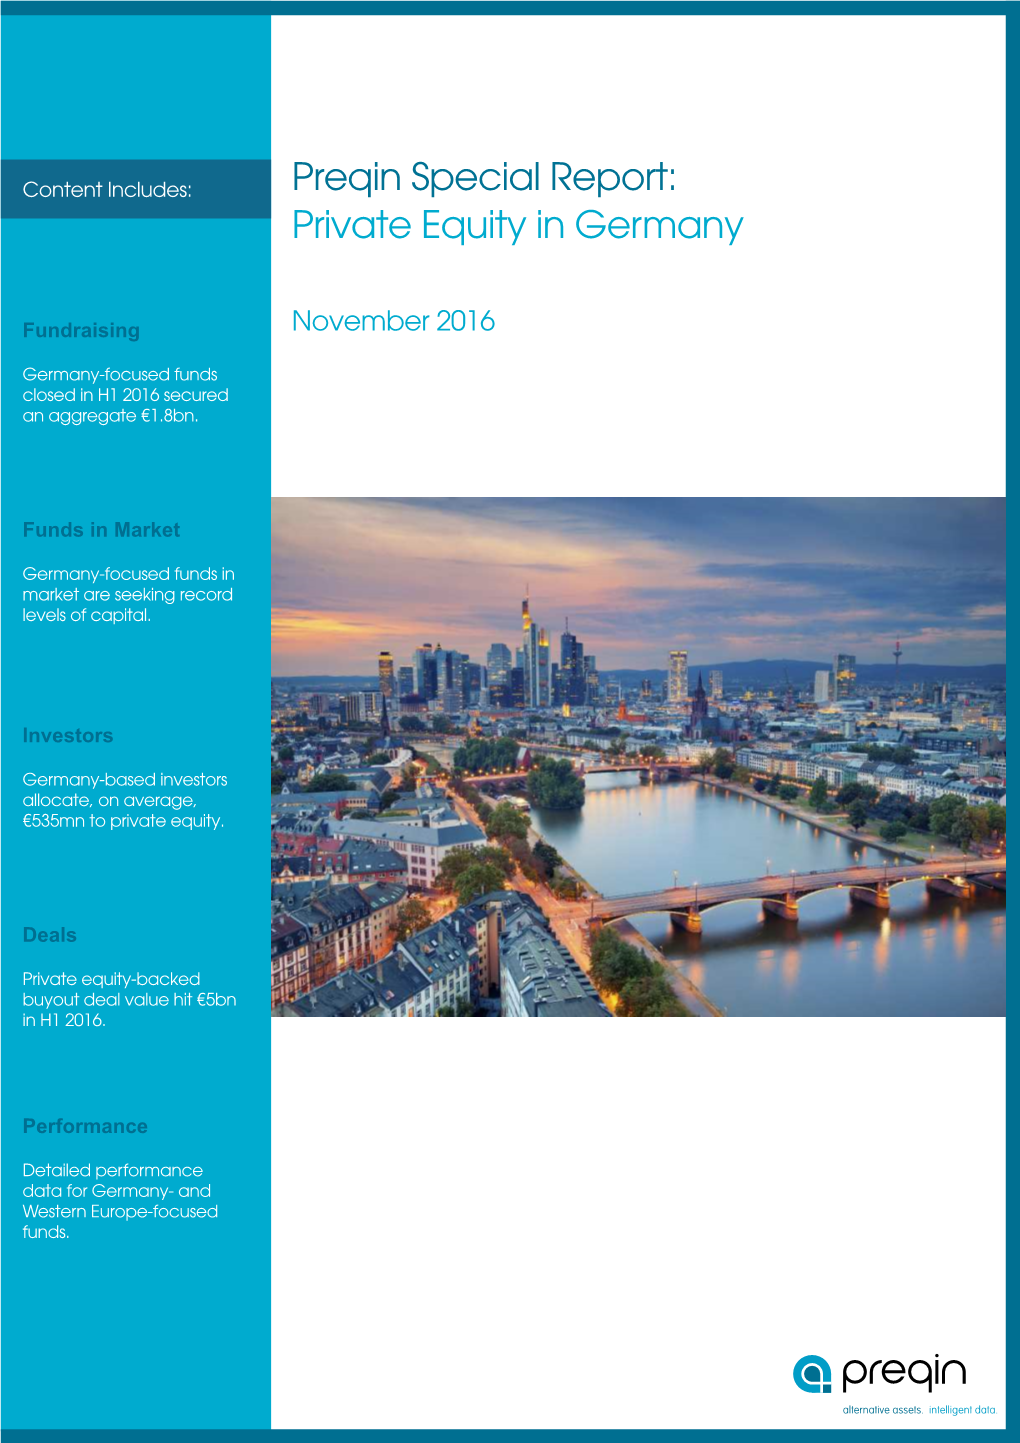 Preqin Special Report: Private Equity in Germany